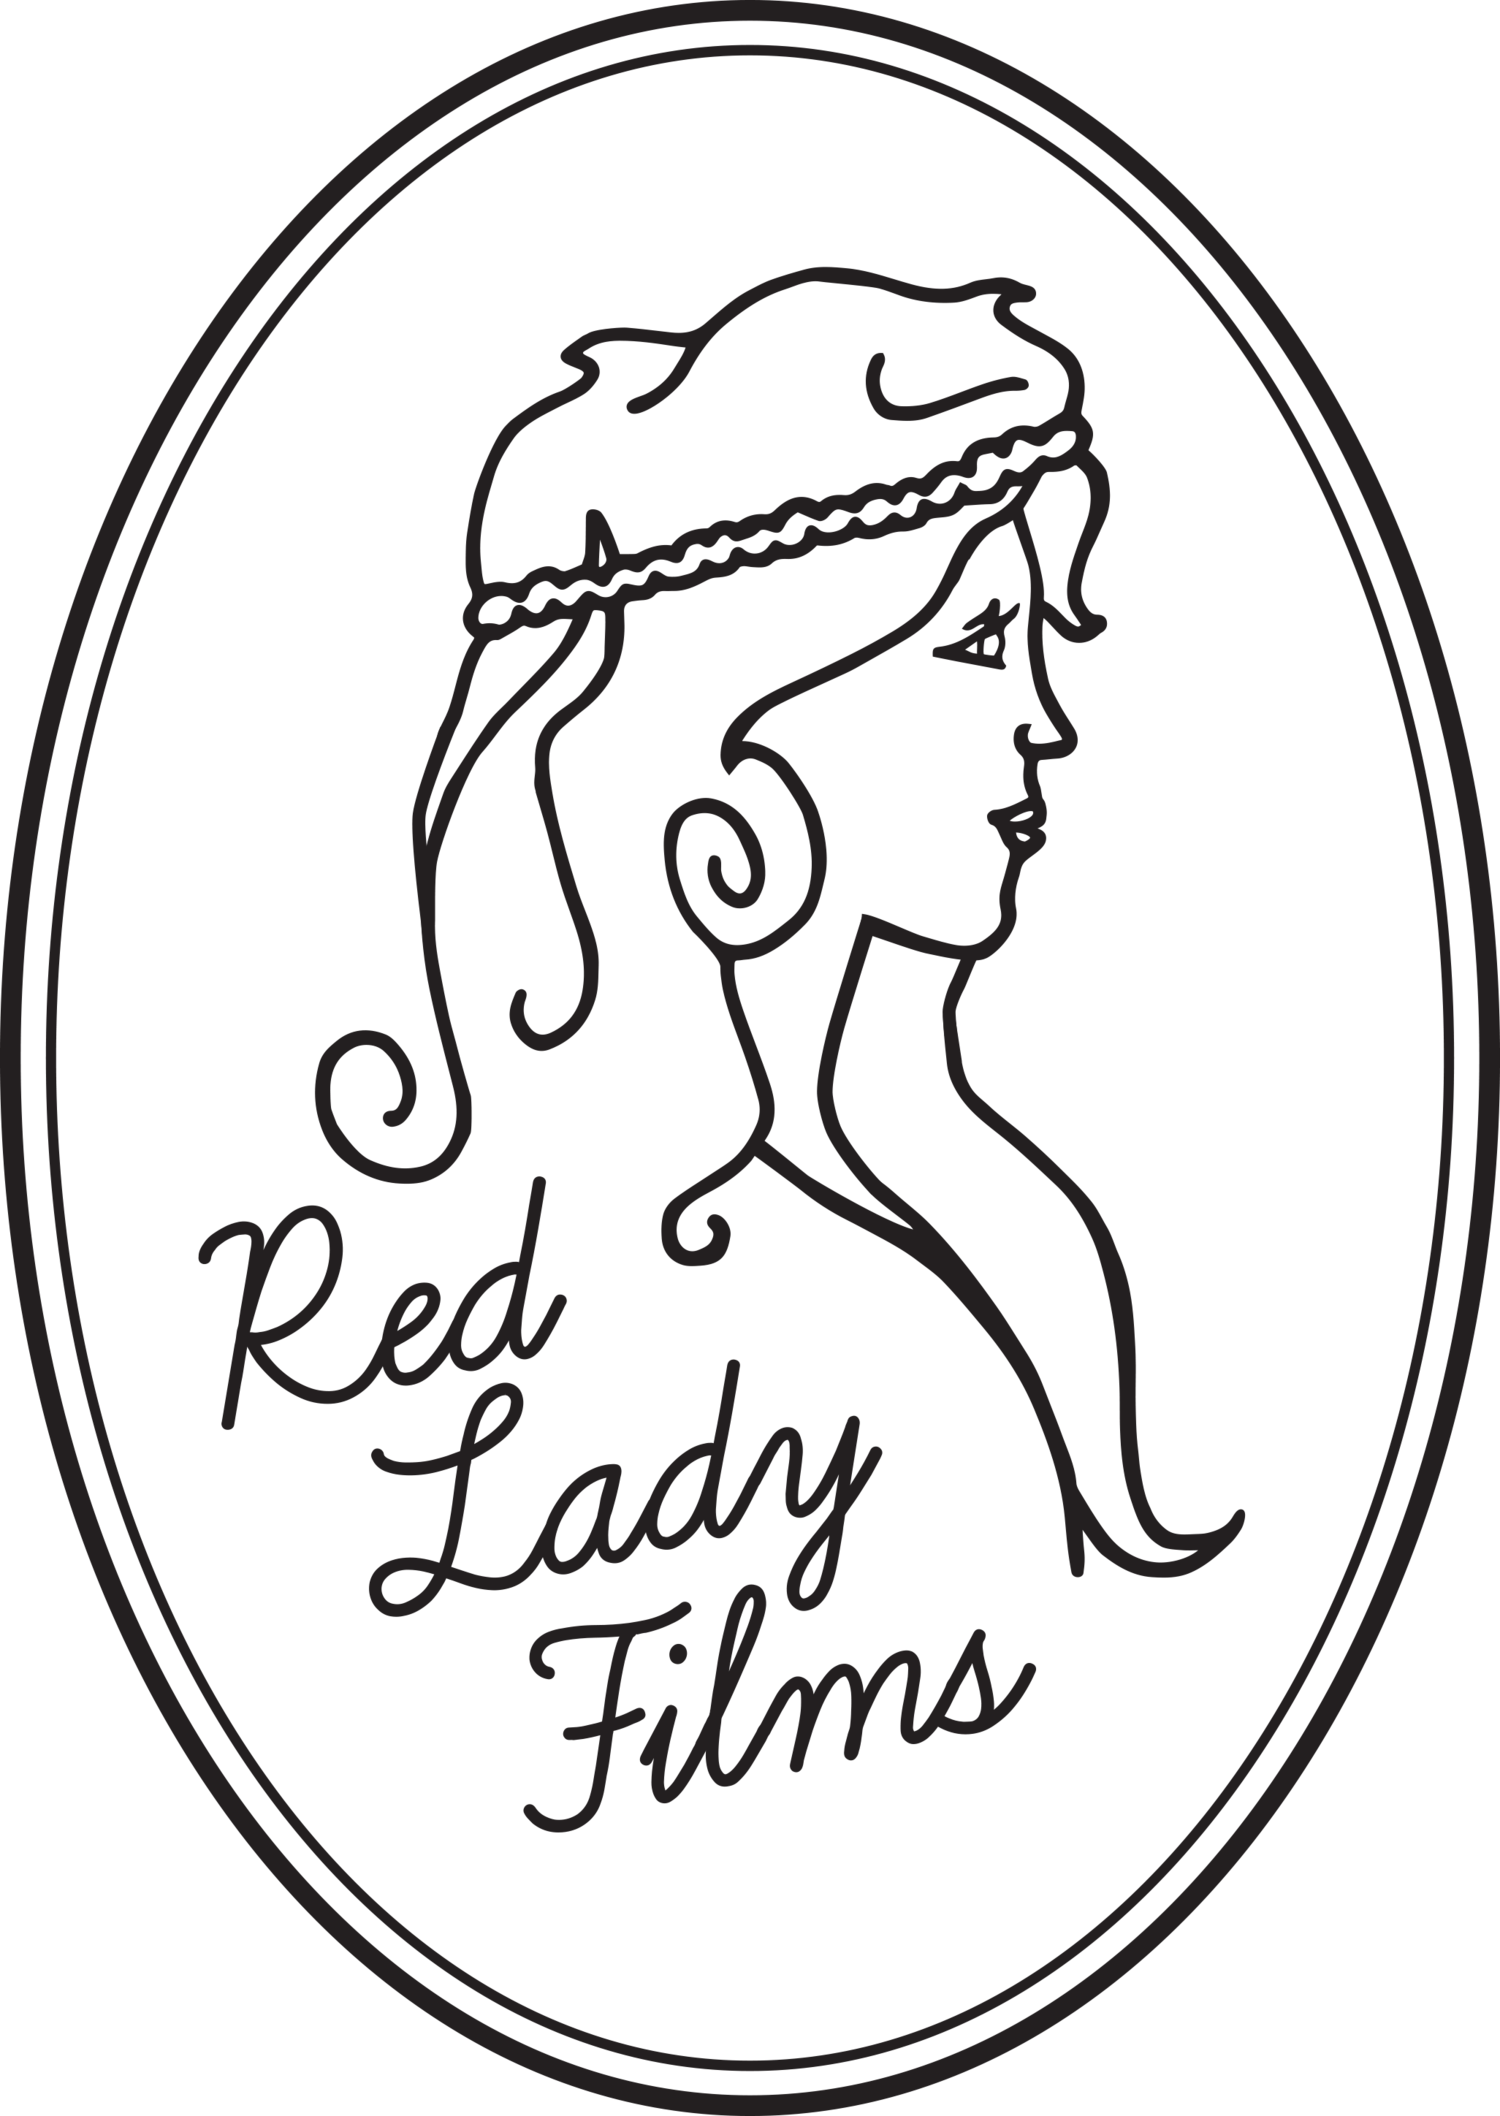 RED LADY FILMS